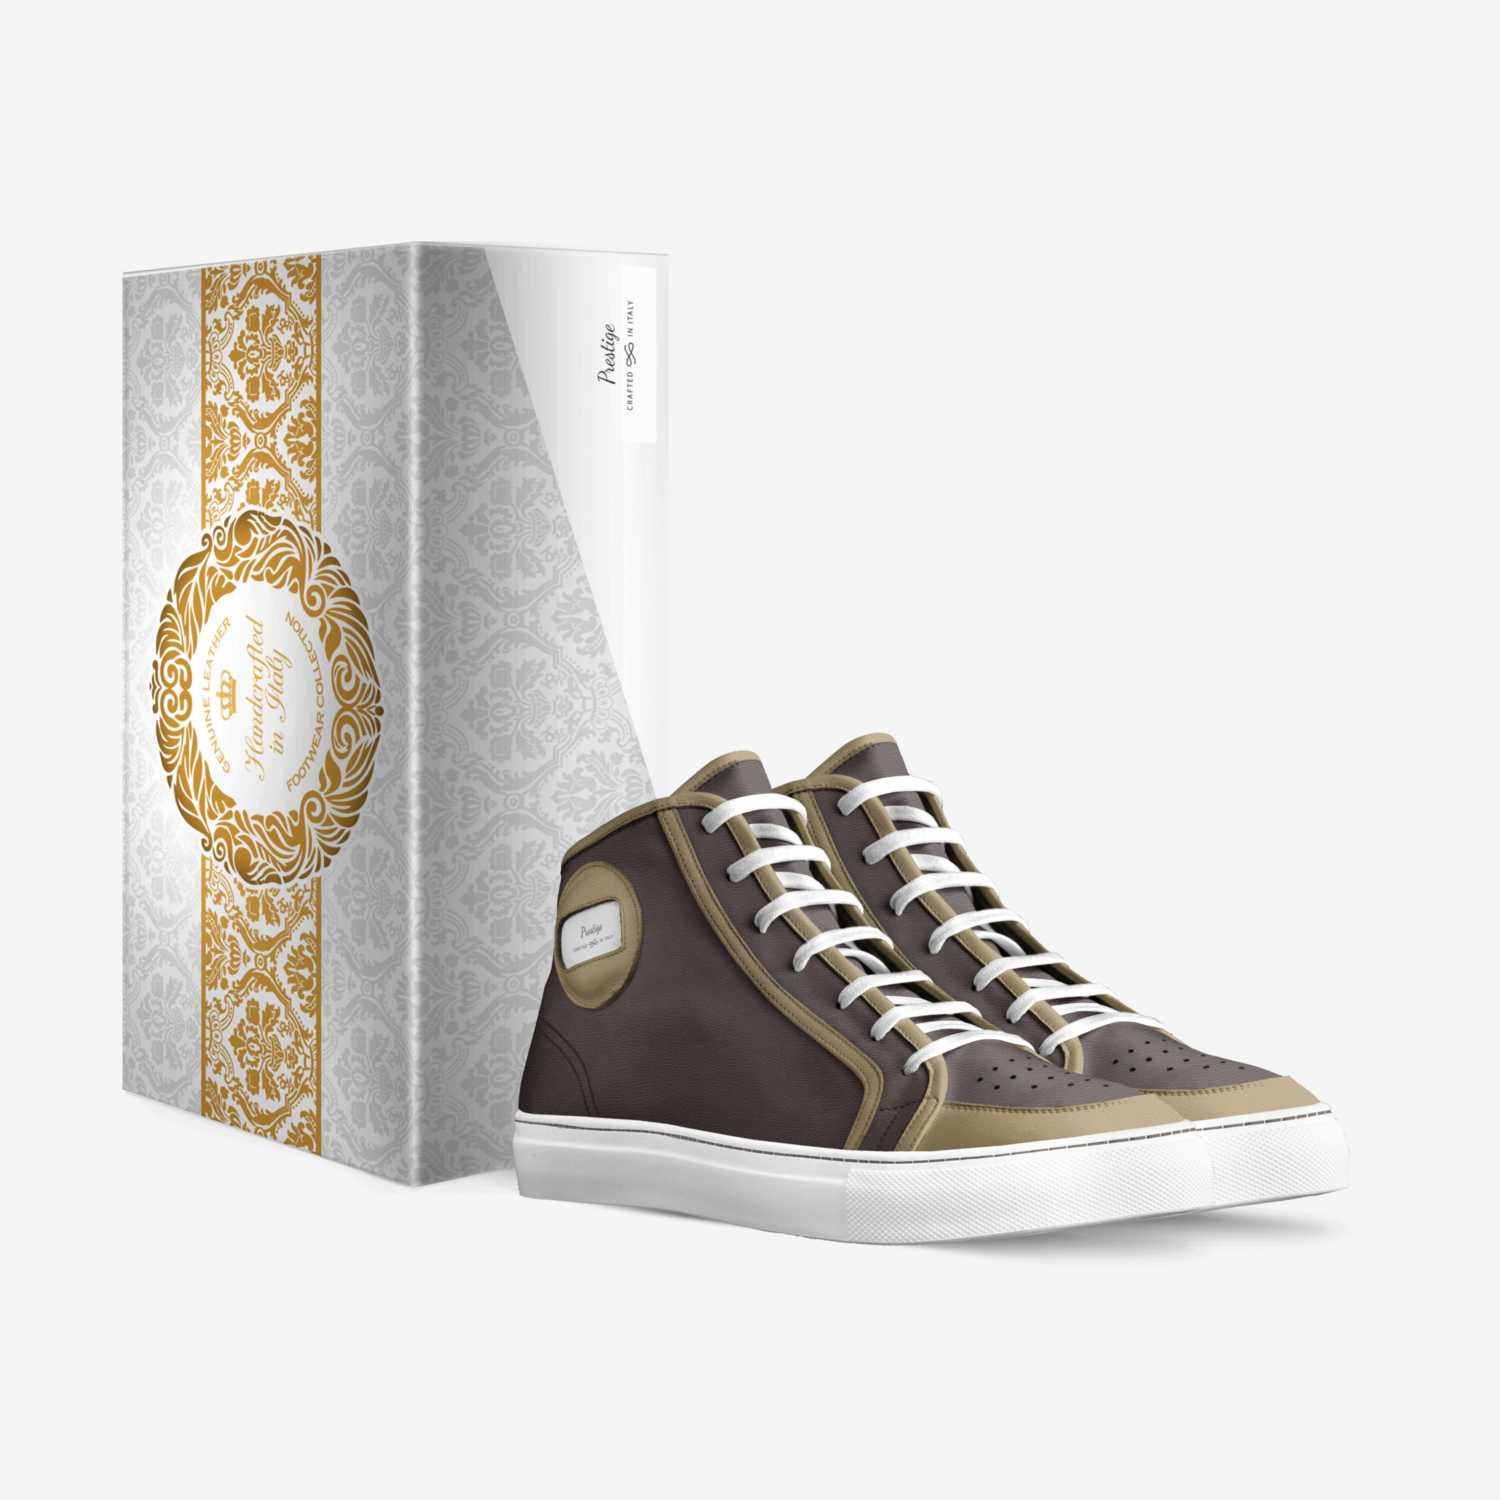 Divinity IX custom made in Italy shoes by John Linzie | Box view